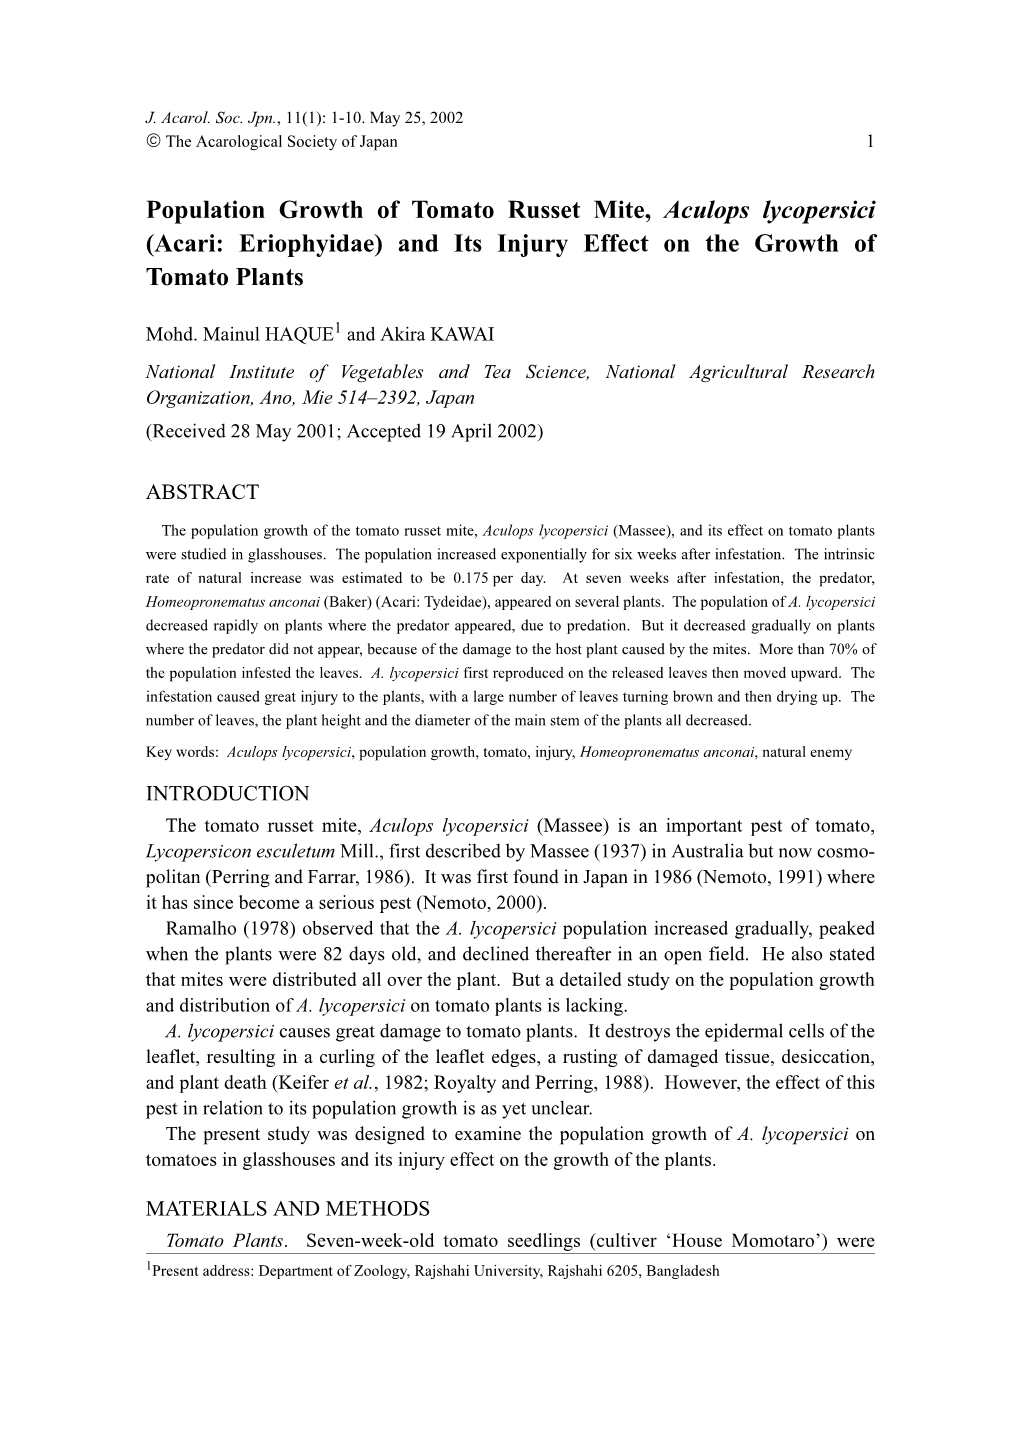 Population Growth of Tomato Russet Mite, Aculops Lycopersici (Acari: Eriophyidae) and Its Injury Effect on the Growth of Tomato Plants